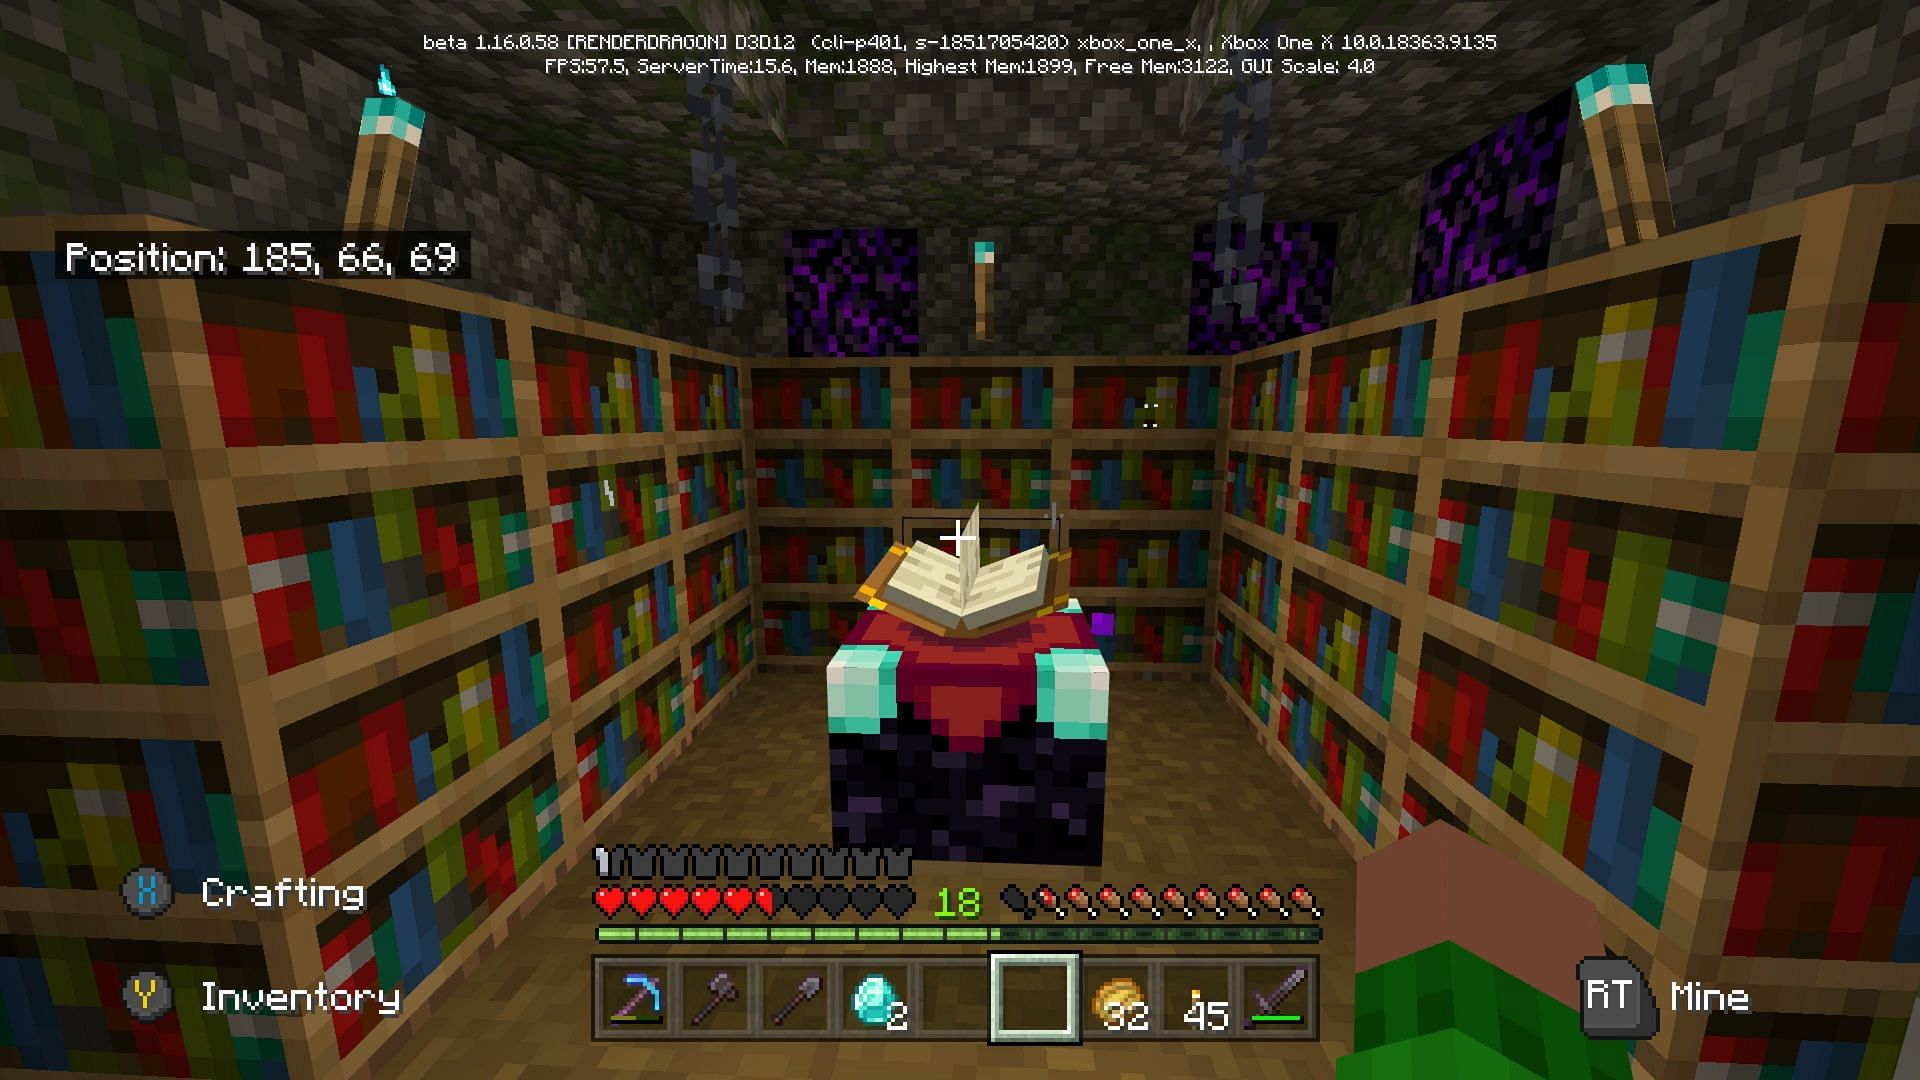 Fortune can be obtained from the enchanting table (Image via Mojang)